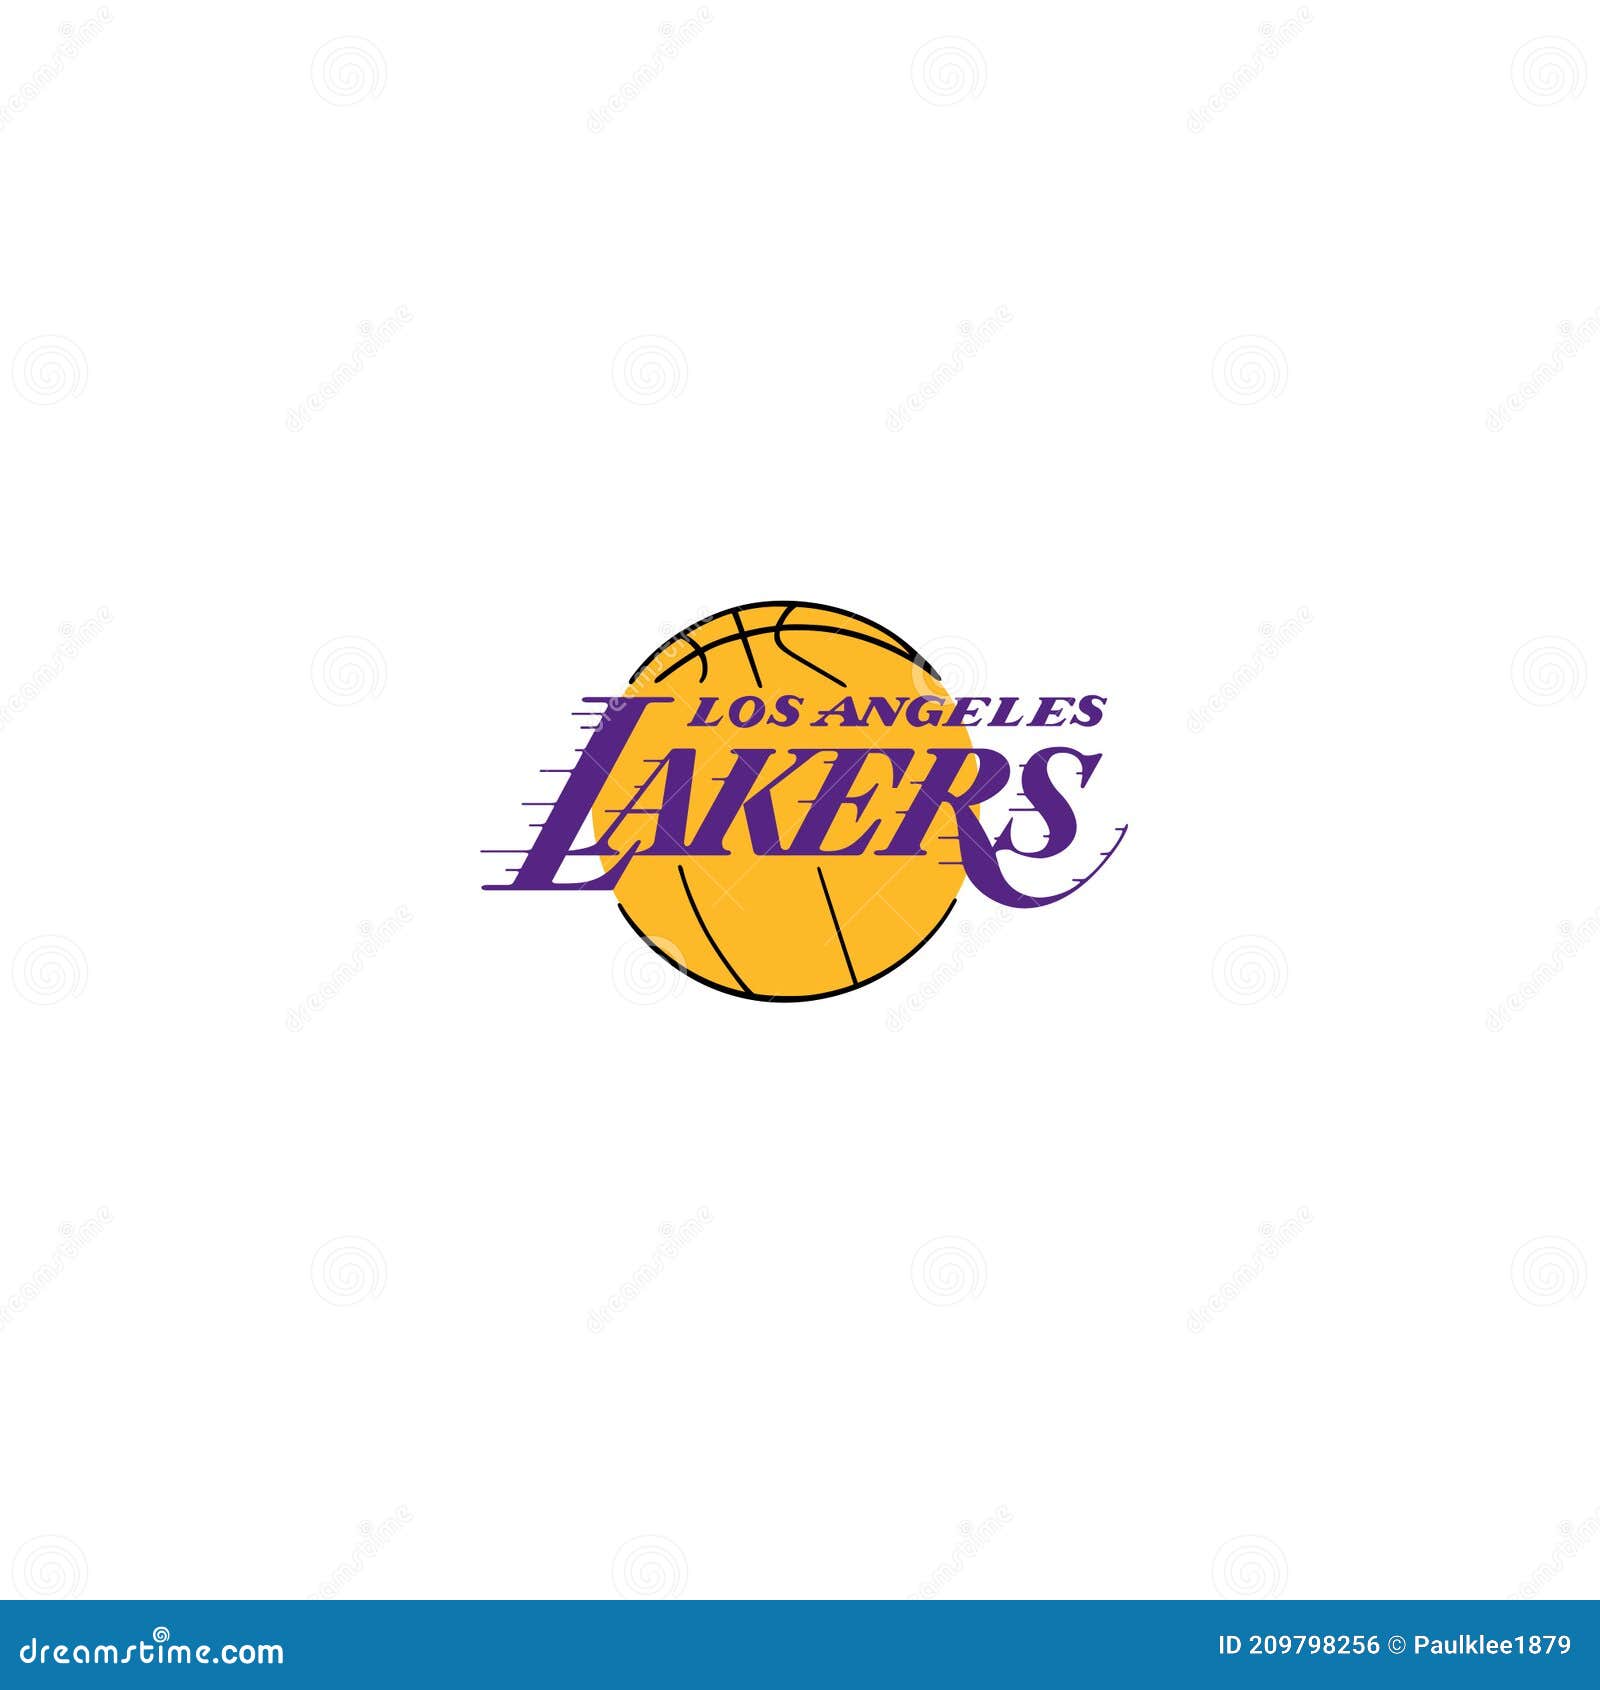 Utah Jazz Jersey Vector Art, Icons, and Graphics for Free Download